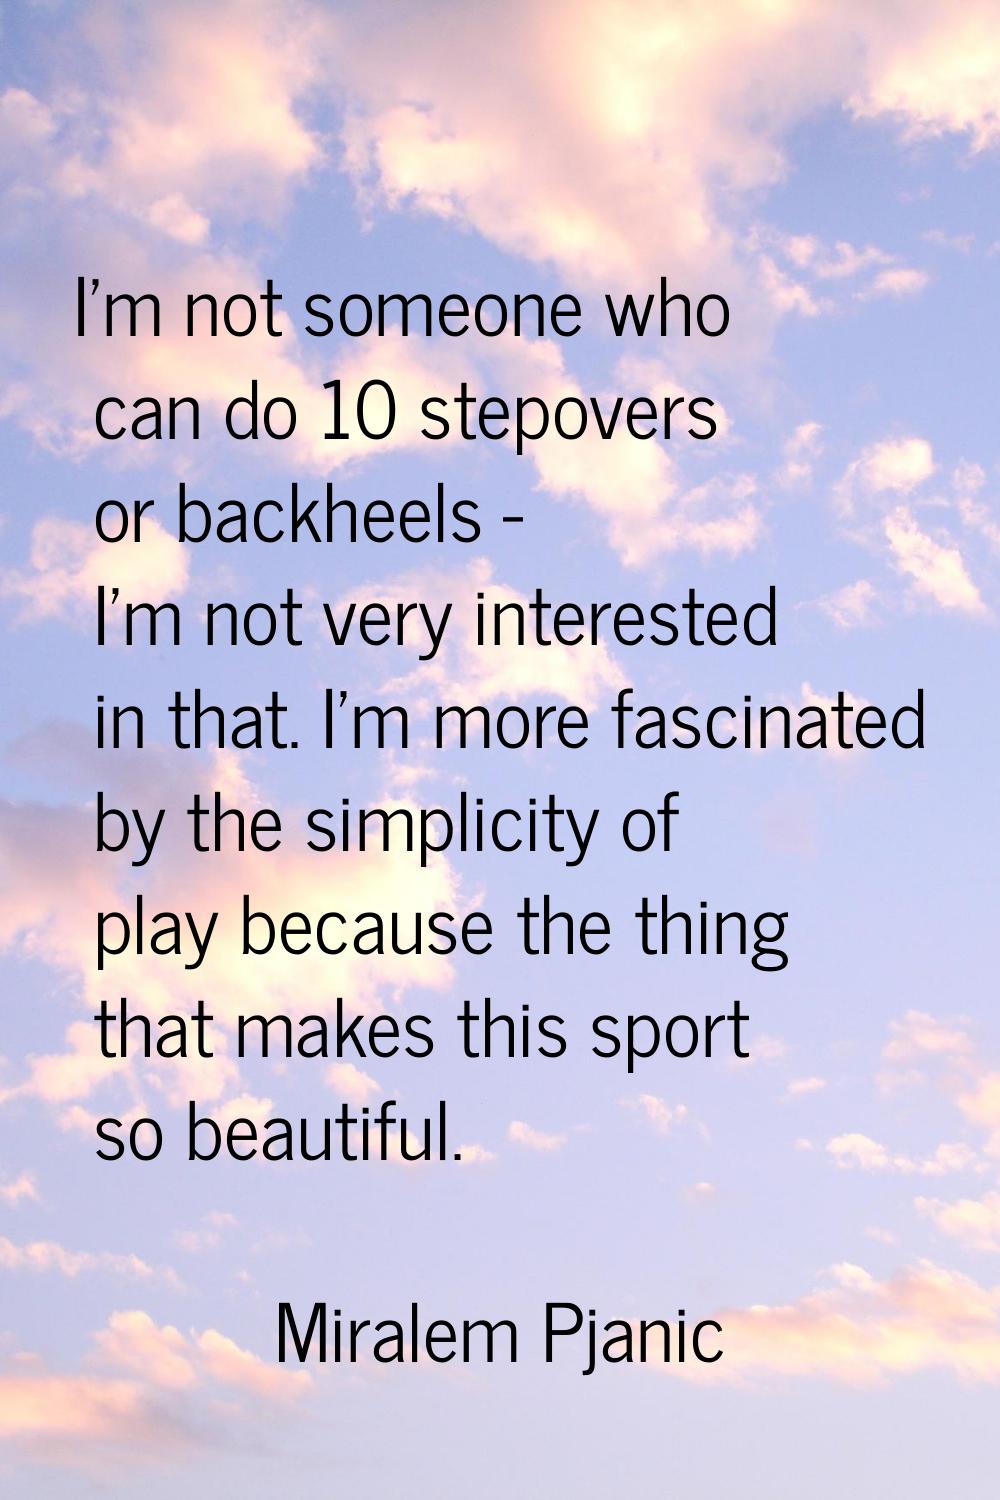 I'm not someone who can do 10 stepovers or backheels - I'm not very interested in that. I'm more fa